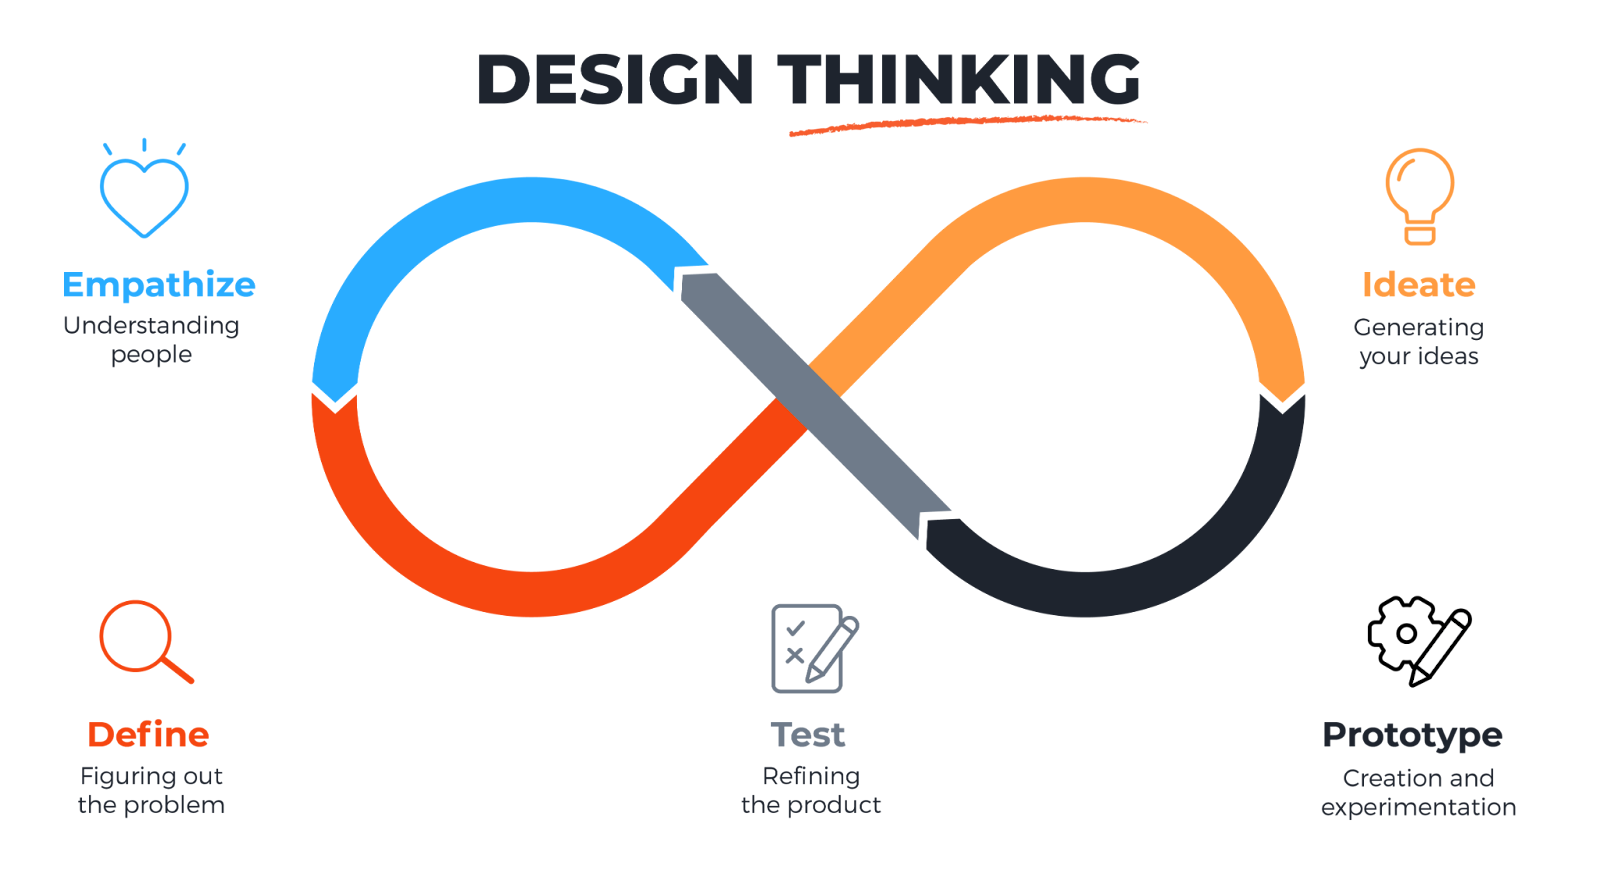 The design thinking cycle.